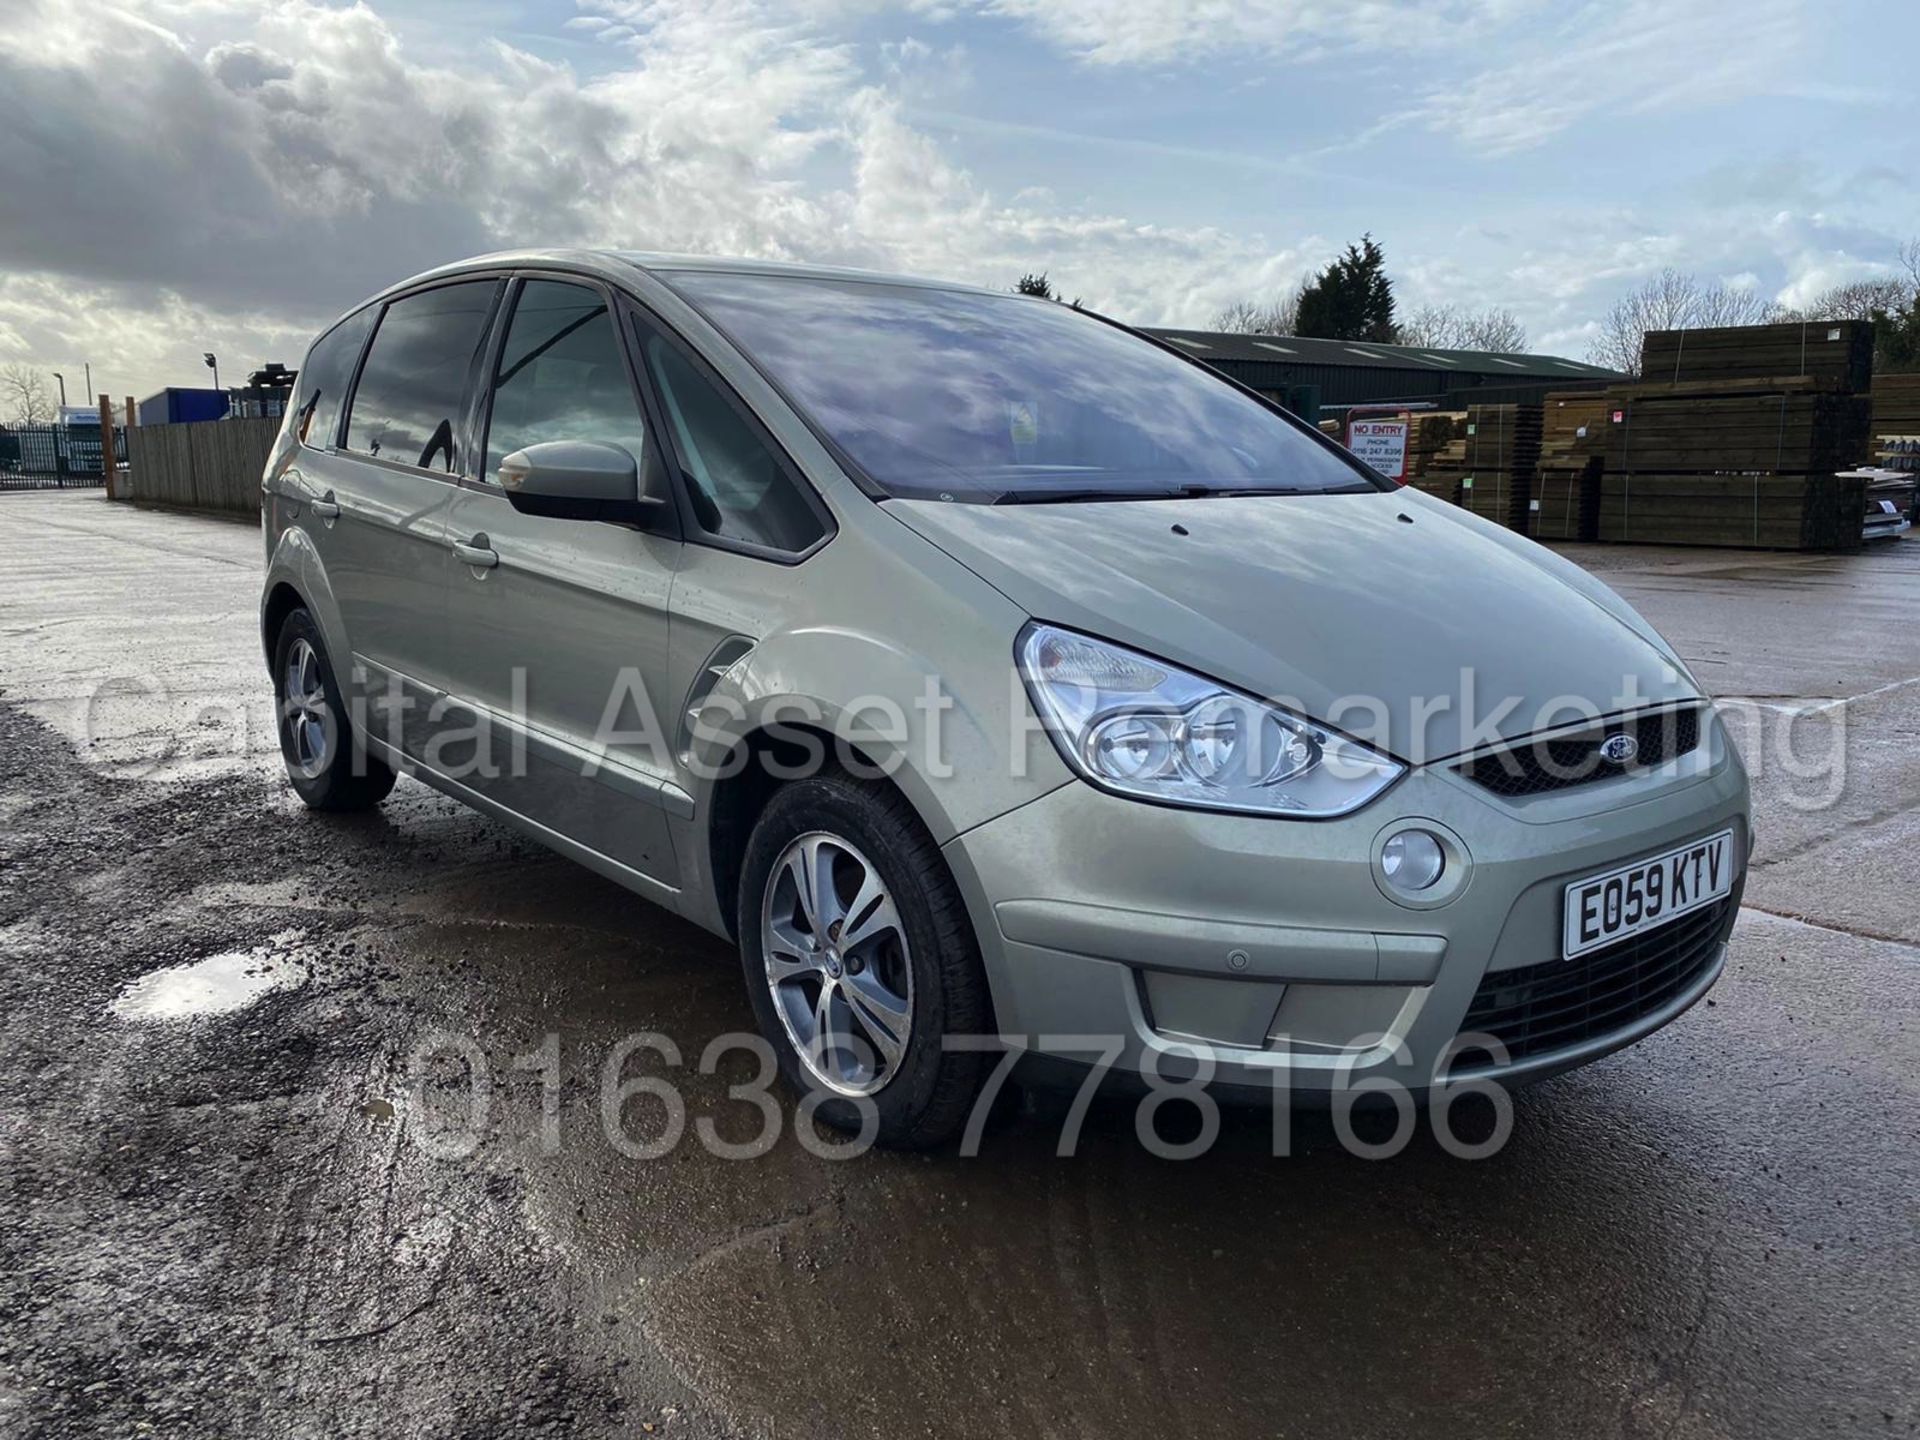 (On Sale) FORD S-MAX *ZETEC EDITION* 7 SEATER MPV (2010 MODEL) '1.8 TDCI - 6 SPEED' *A/C* (NO VAT)